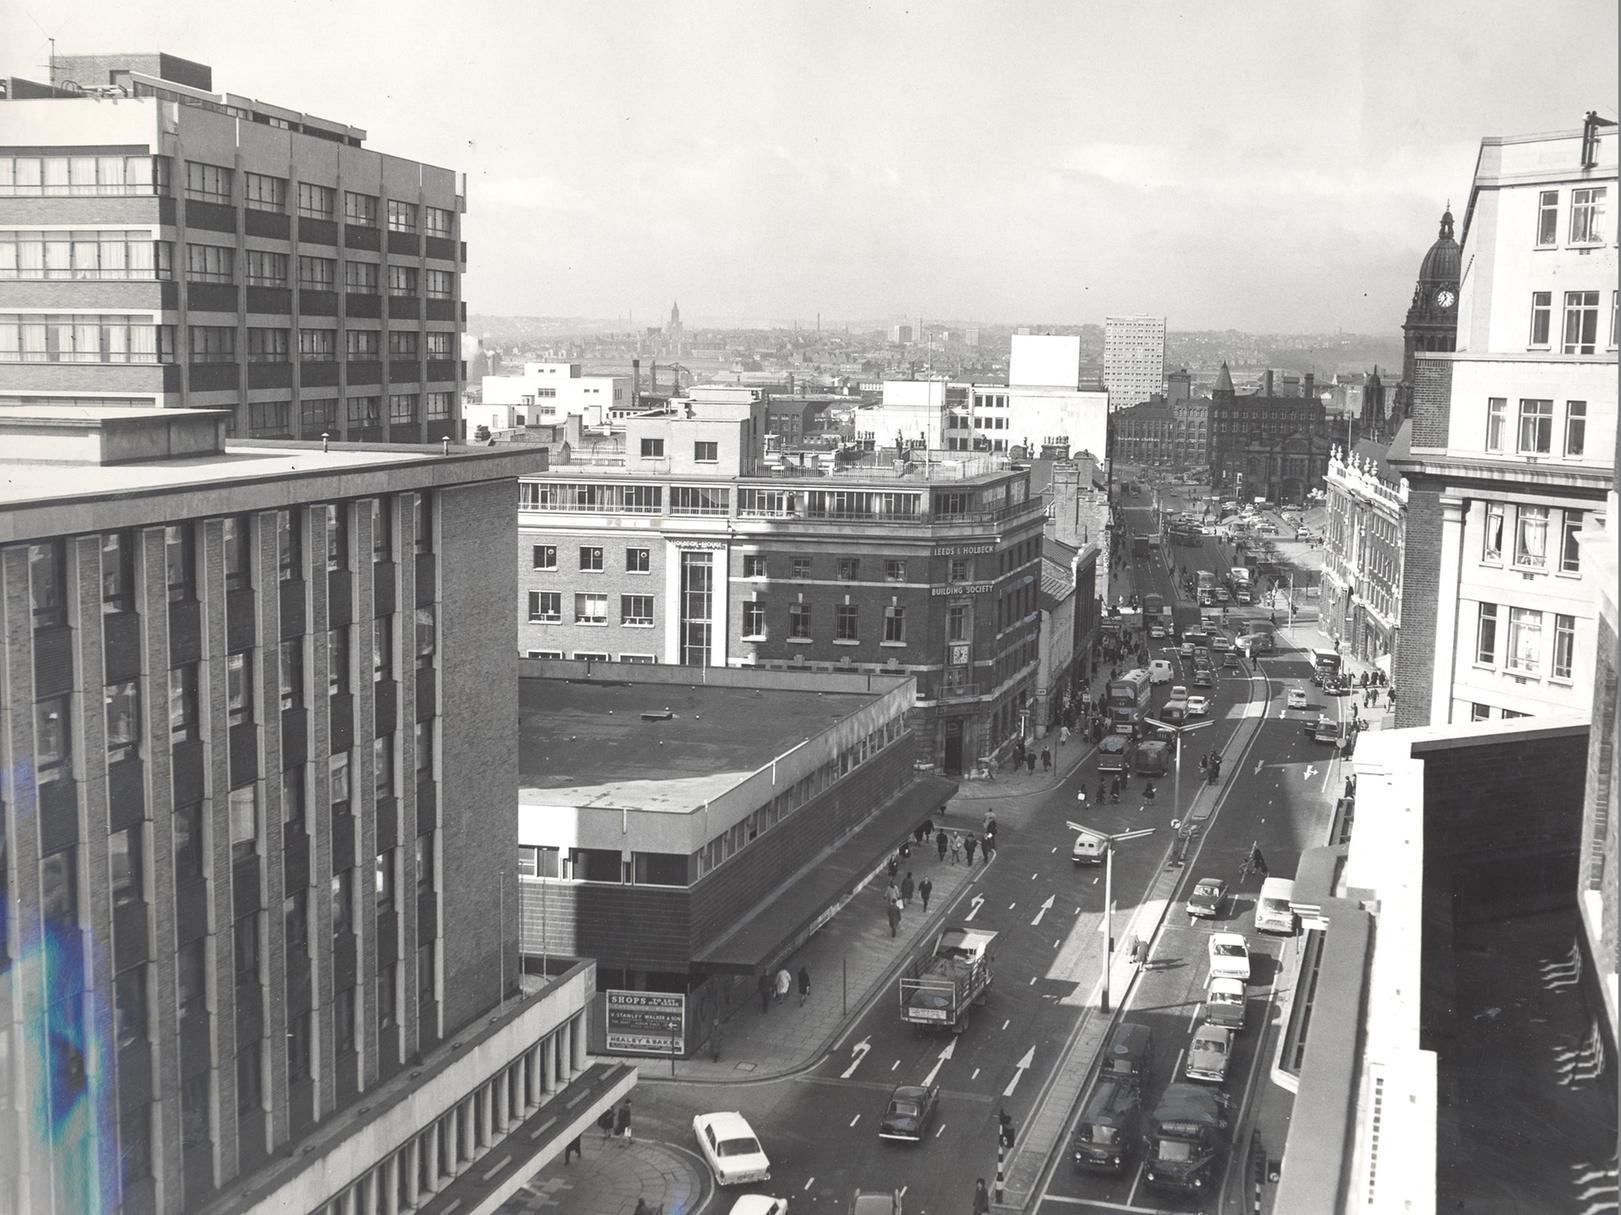 A view of The Headrow towards Leeds Town Hall from the top of the Lewis's store.